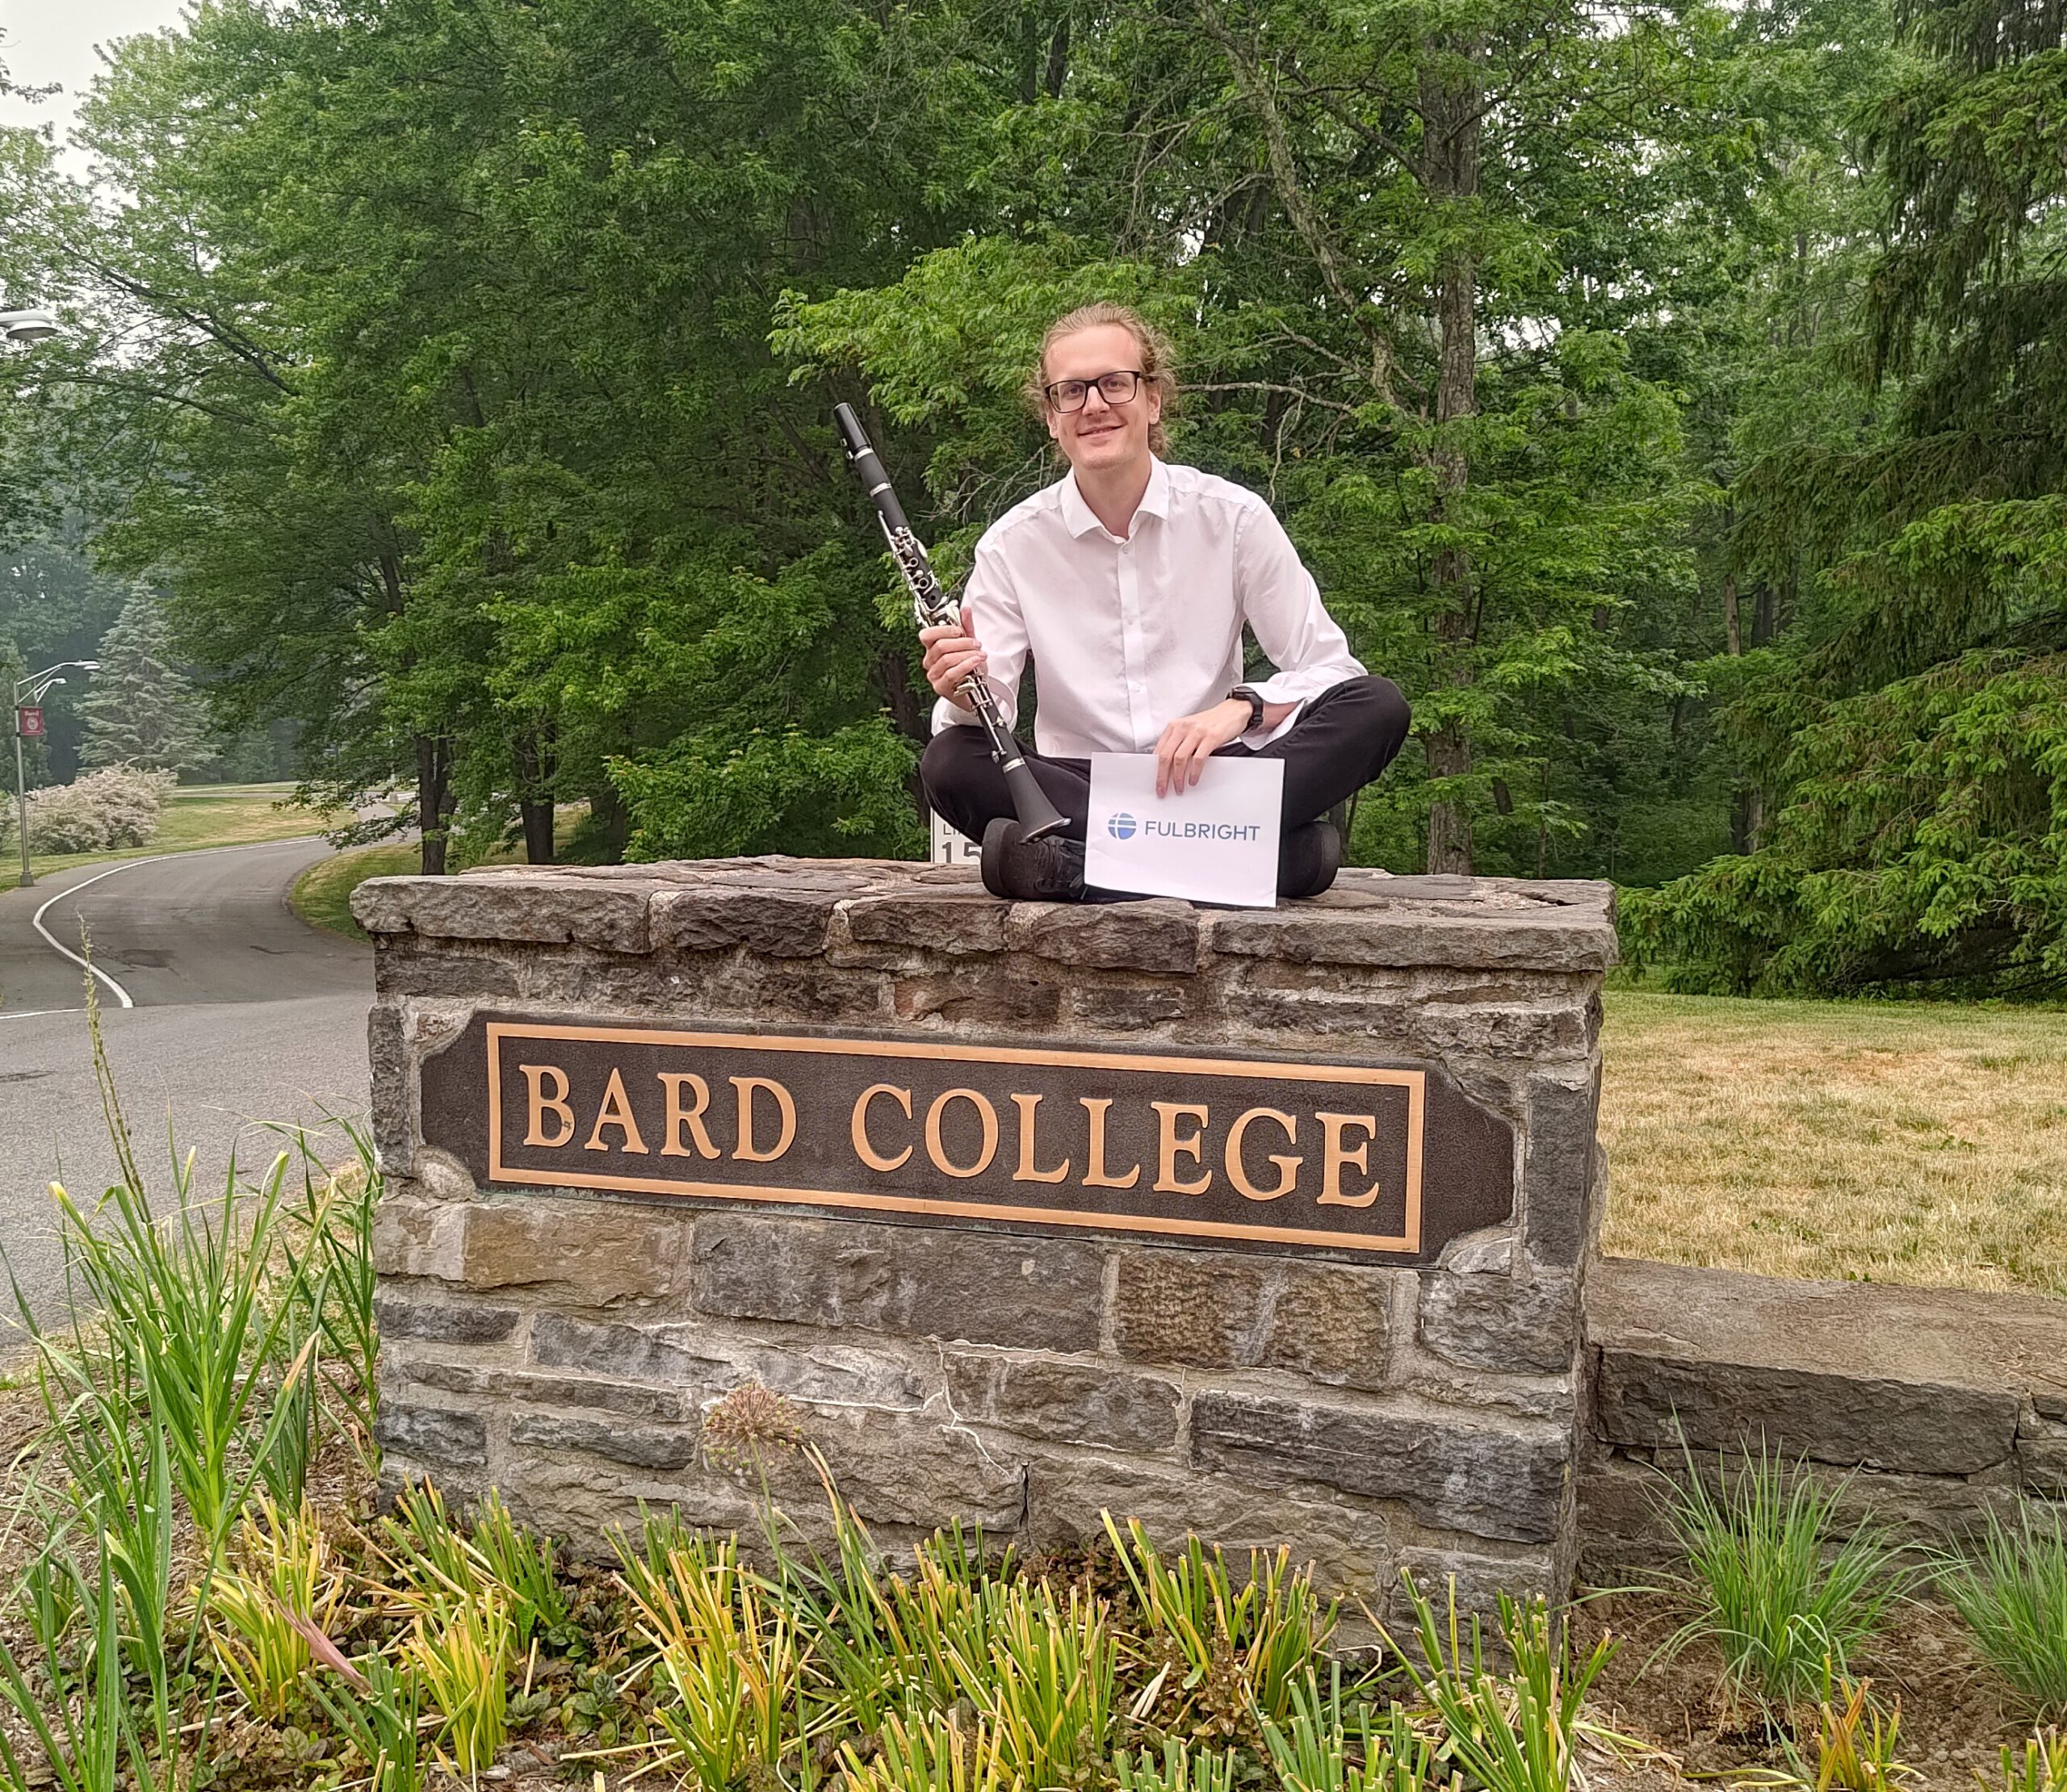 On a Fulbright scholarship at Bard College